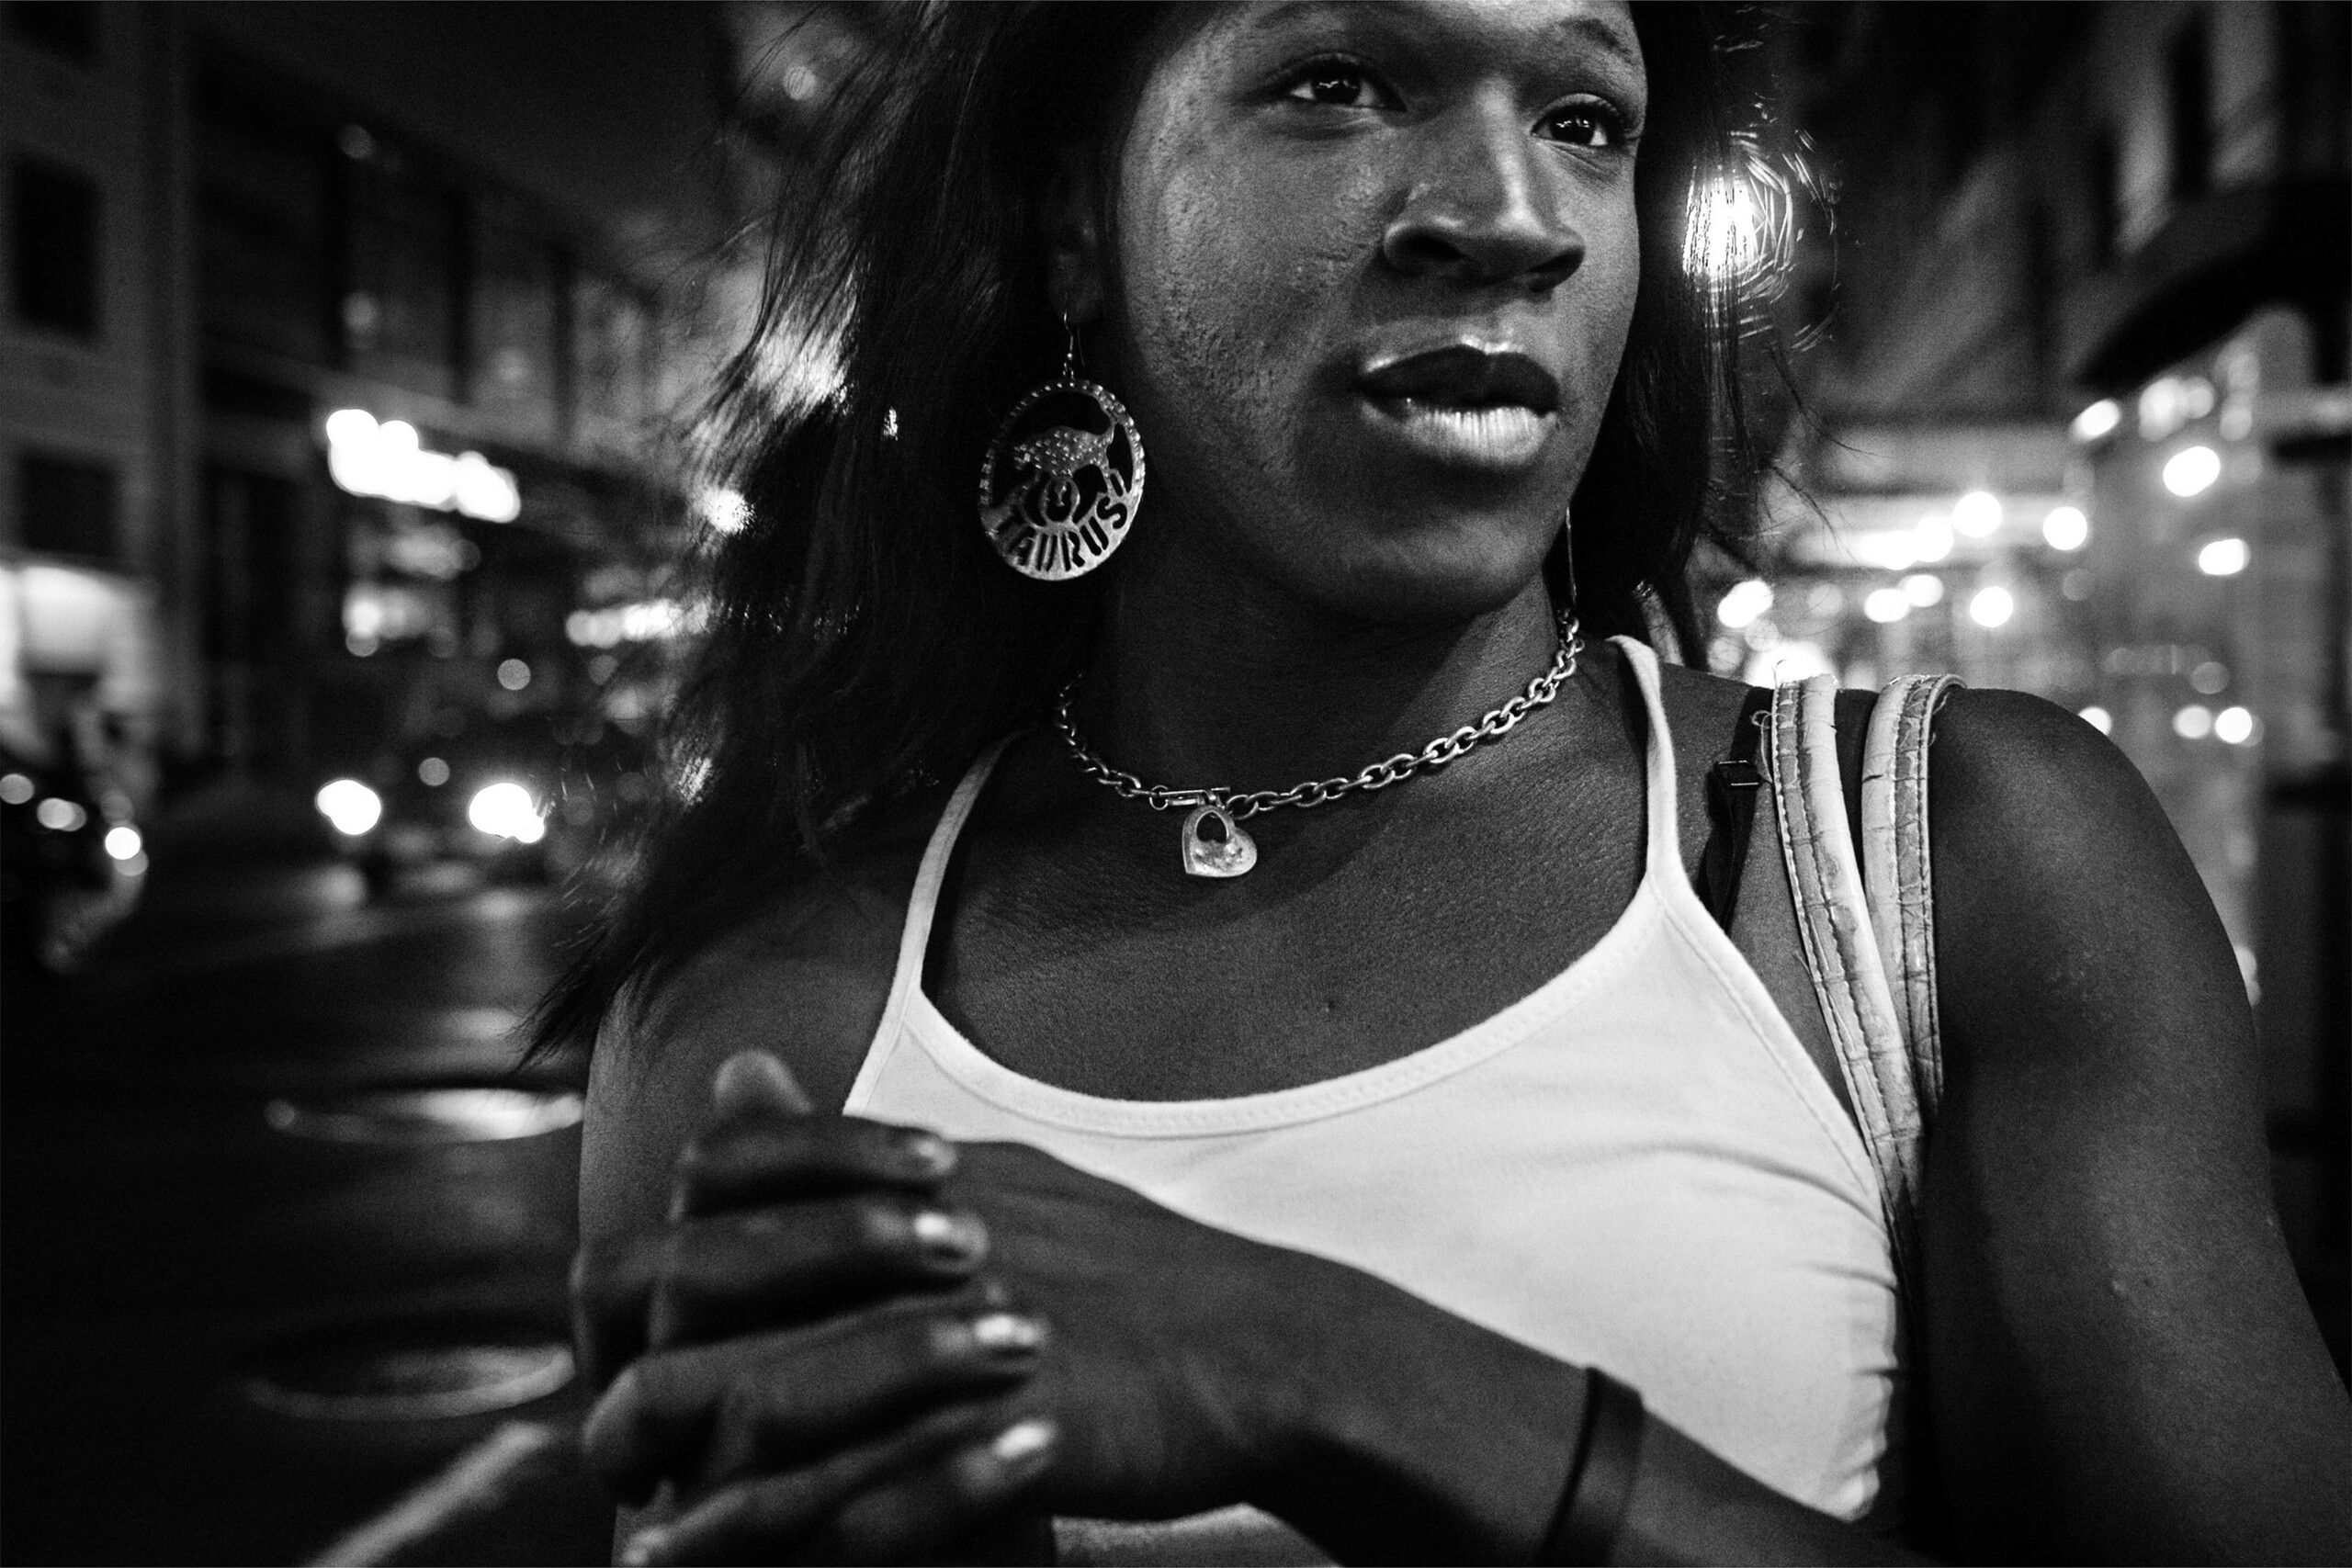 A black-and-white close-up image shows the face and upper body of a dark-skinned woman as she gazes off to the side. She wears a sleeveless white shirt, chain necklace with heart pendant, and large round earrings inscribed with the word “TAURUS.”